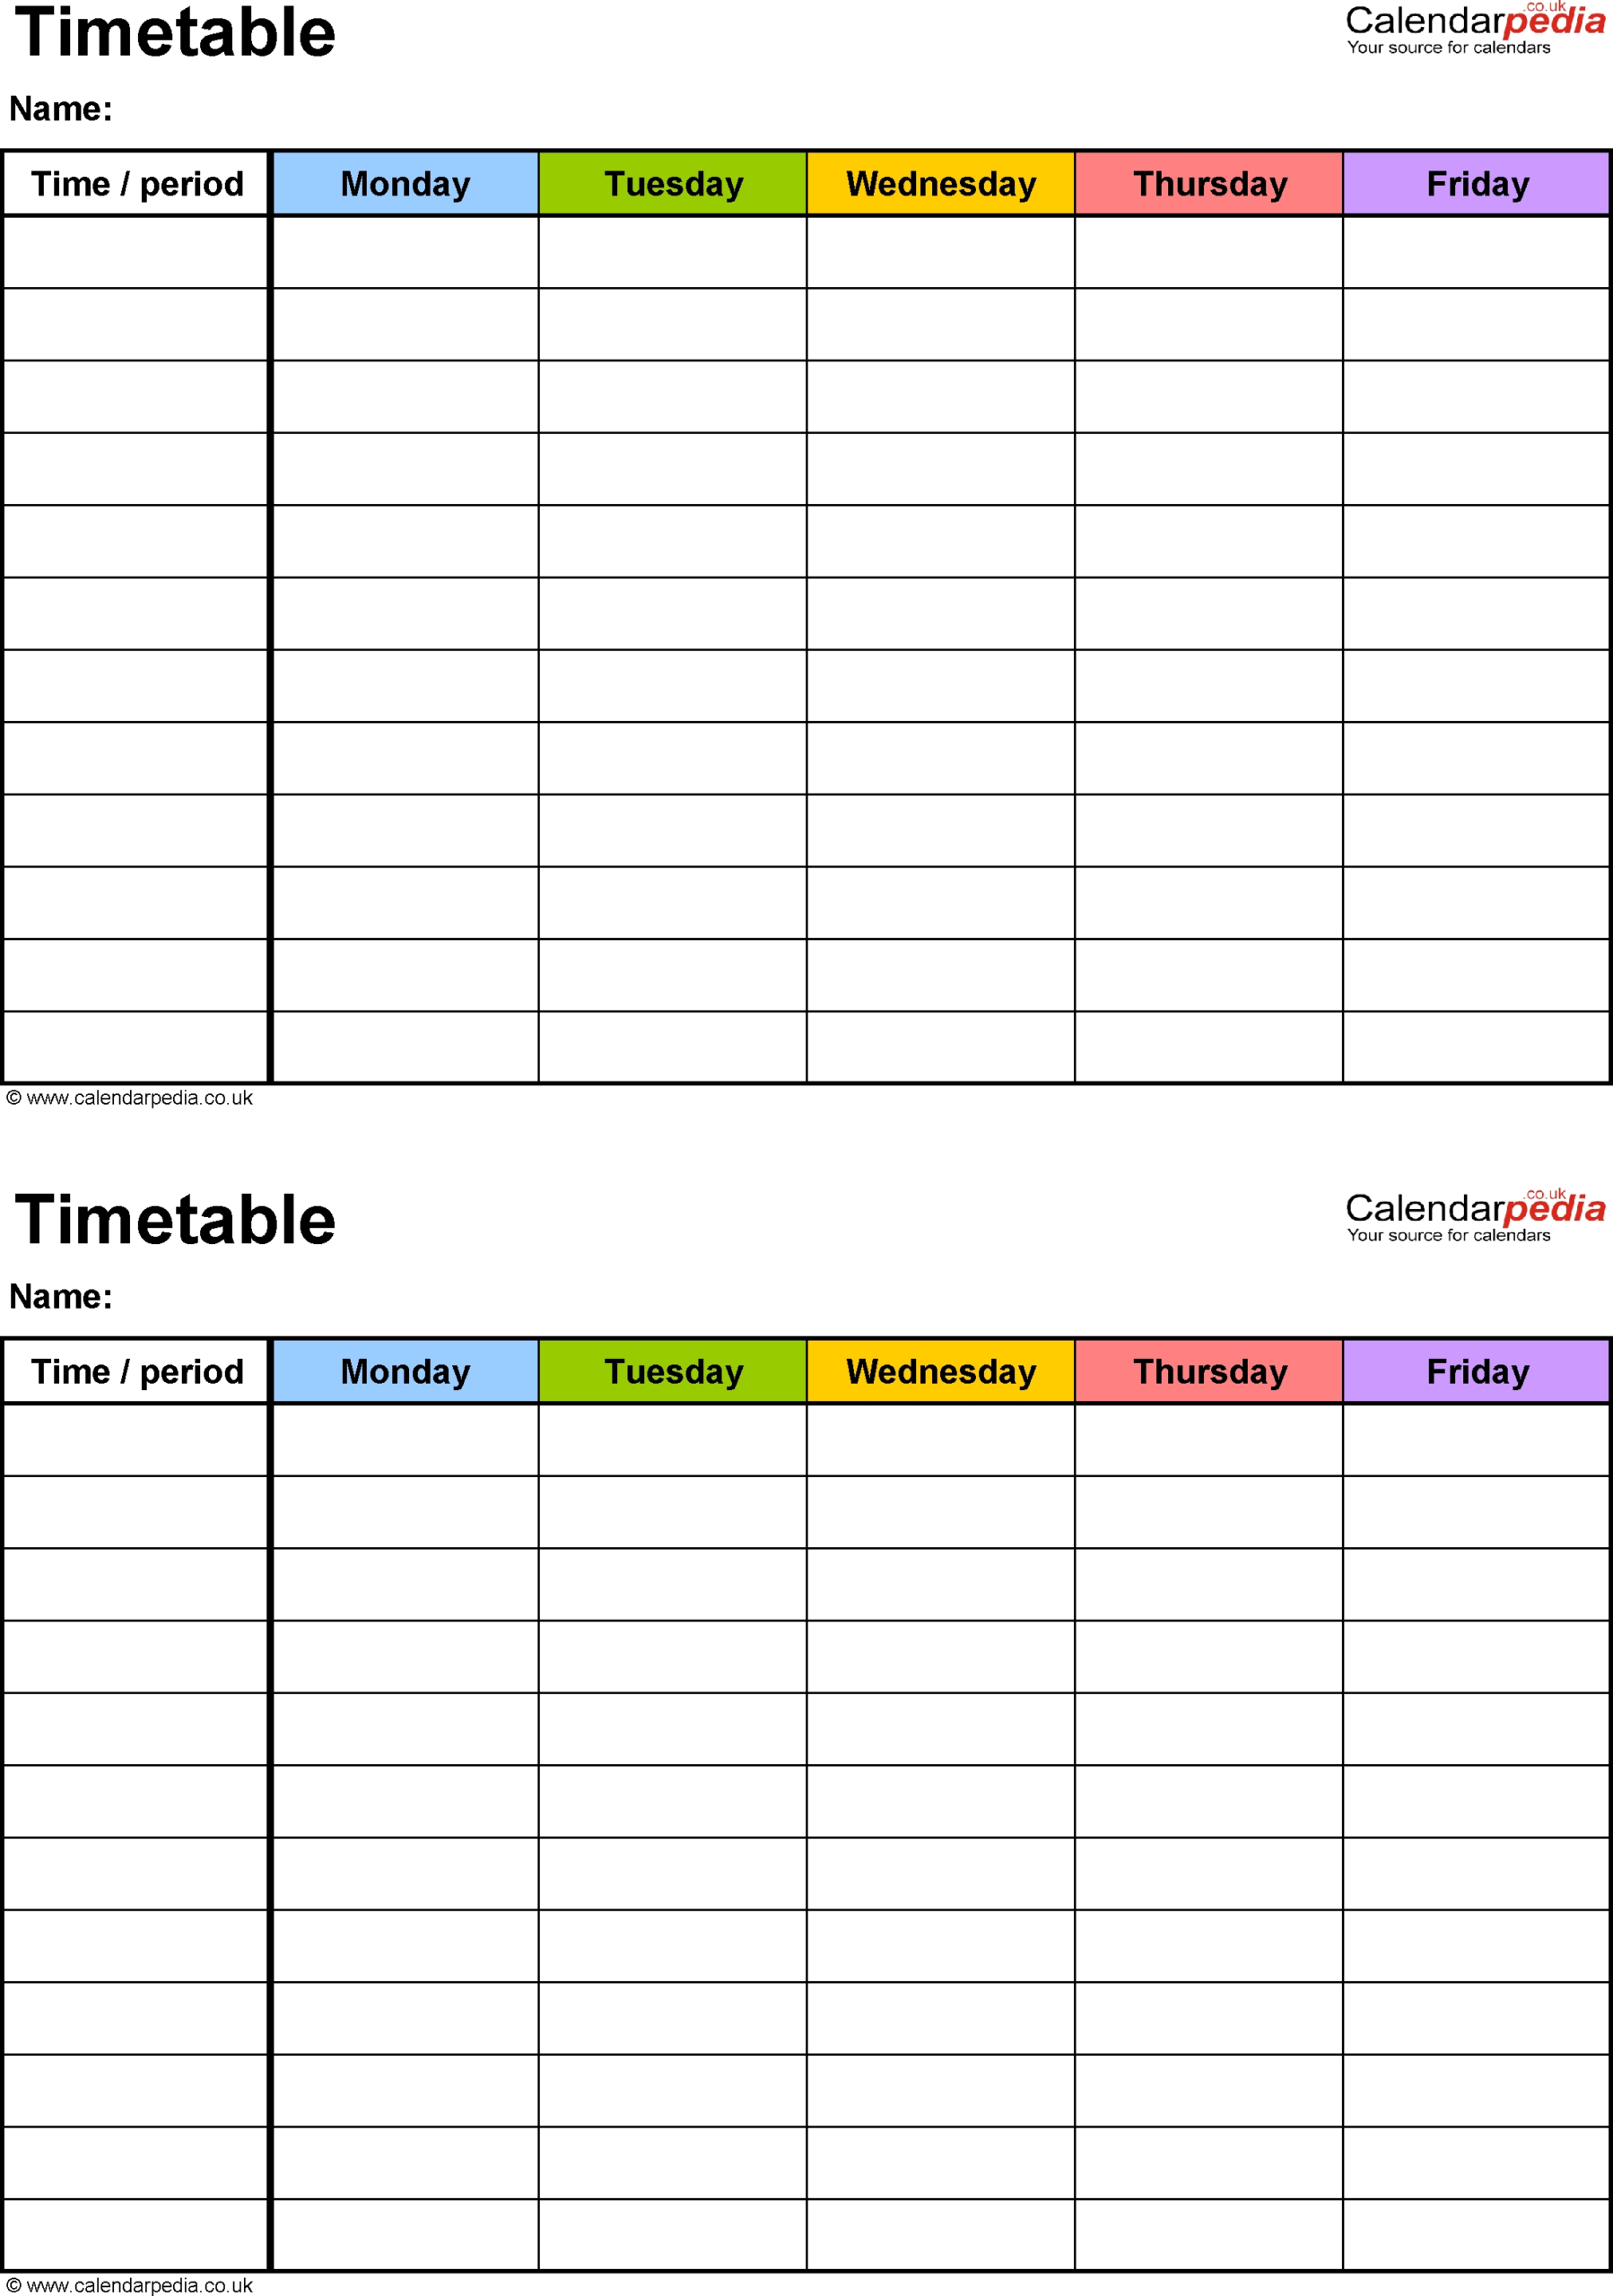 Blank 5 Day School Timetable | Free Calendar Template Example with Blank 5 Day Calendar